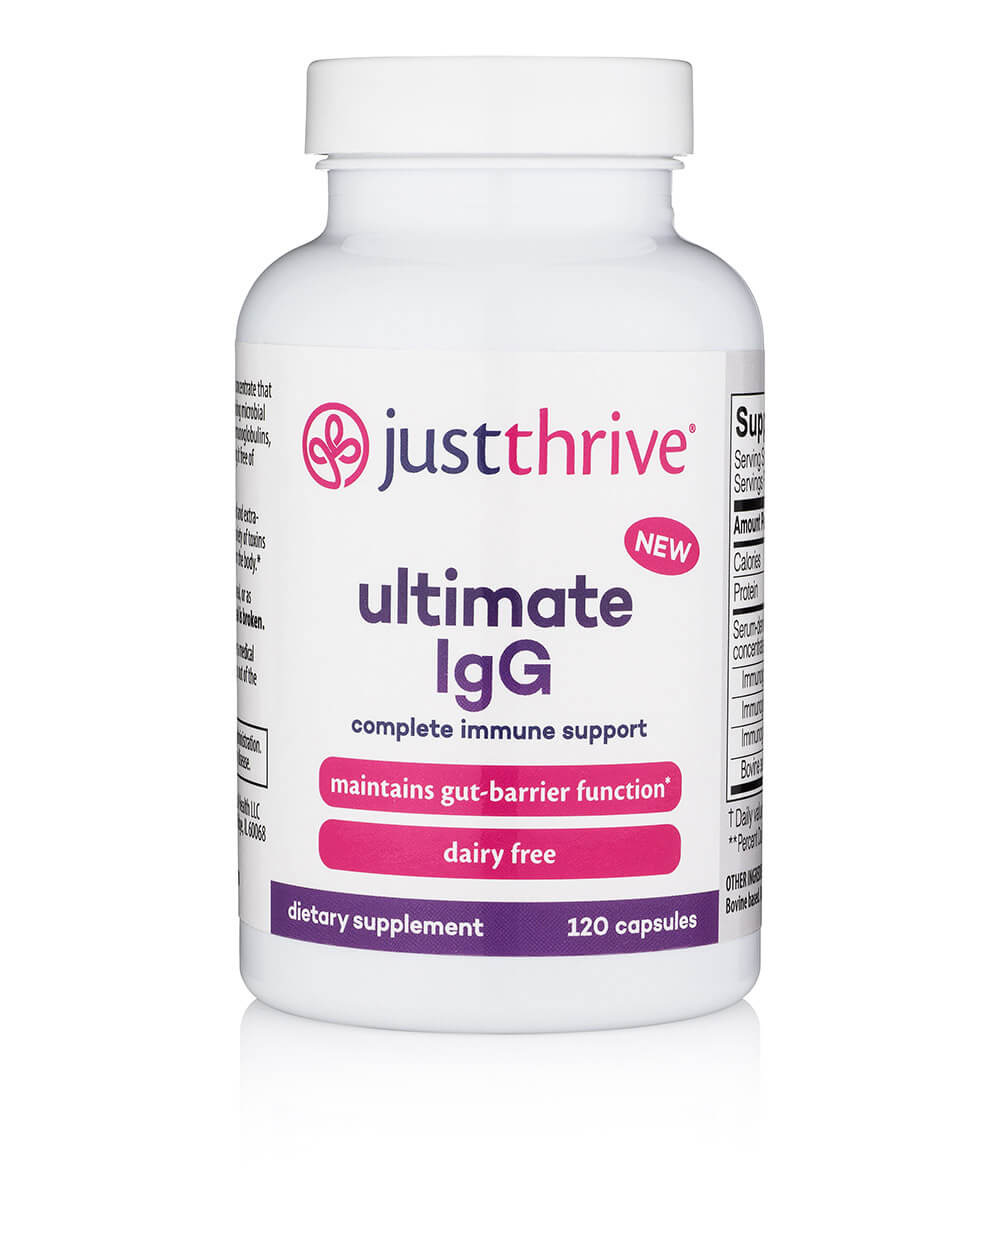 Ultimate IgG Immune and Digestive Support agutsygirl.com #igg #immune #immunesystem #supplement #guthealth Just Thrive Health front